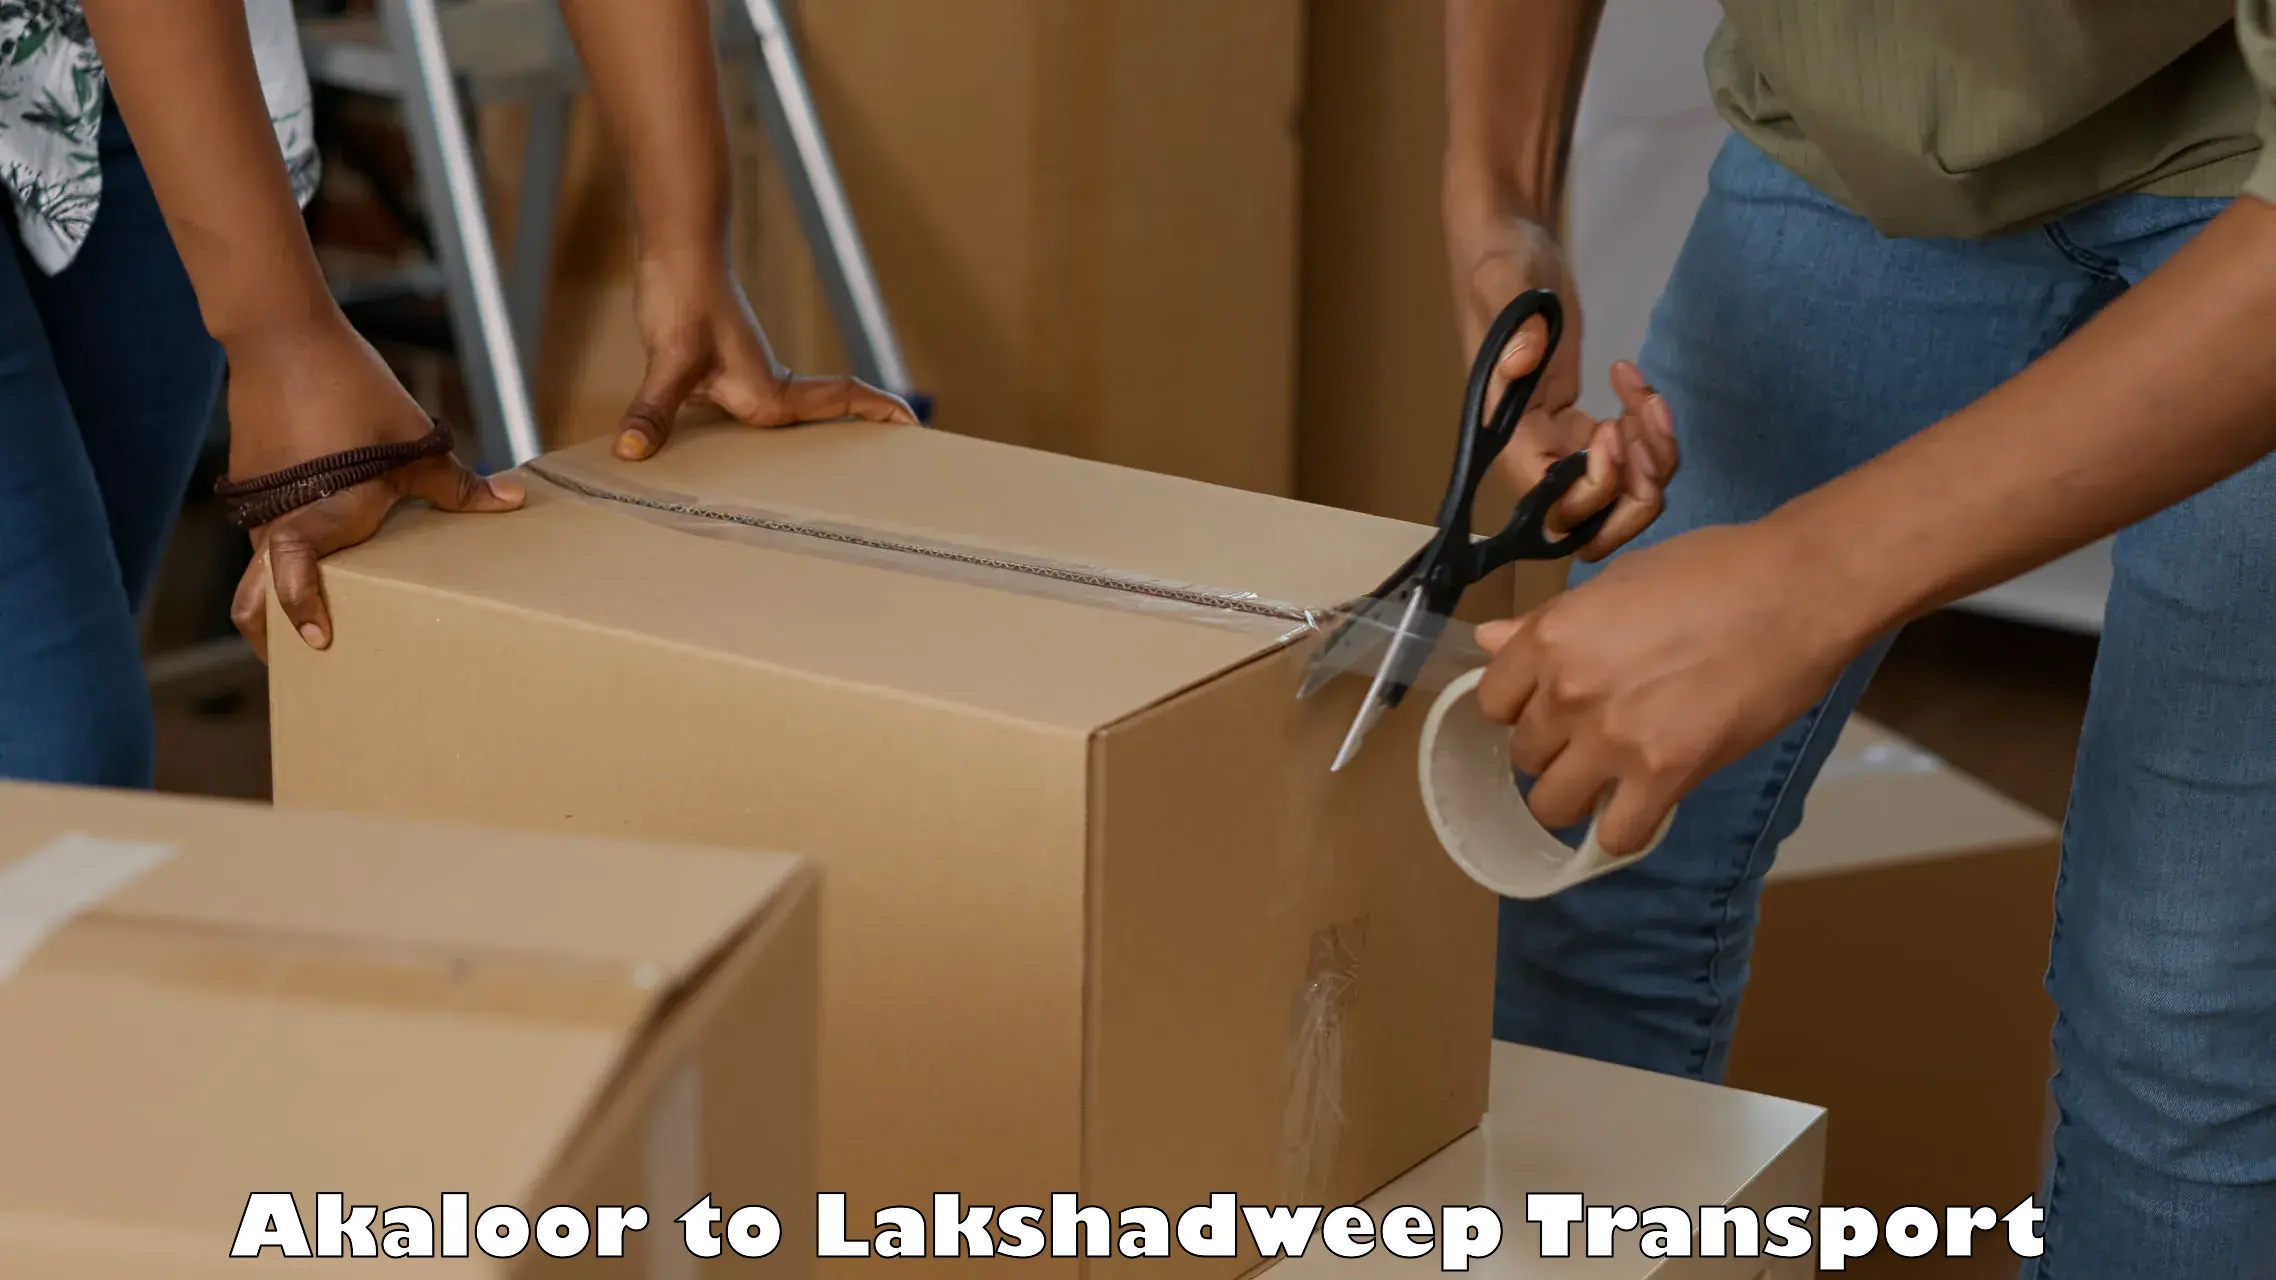 Cargo transport services Akaloor to Lakshadweep